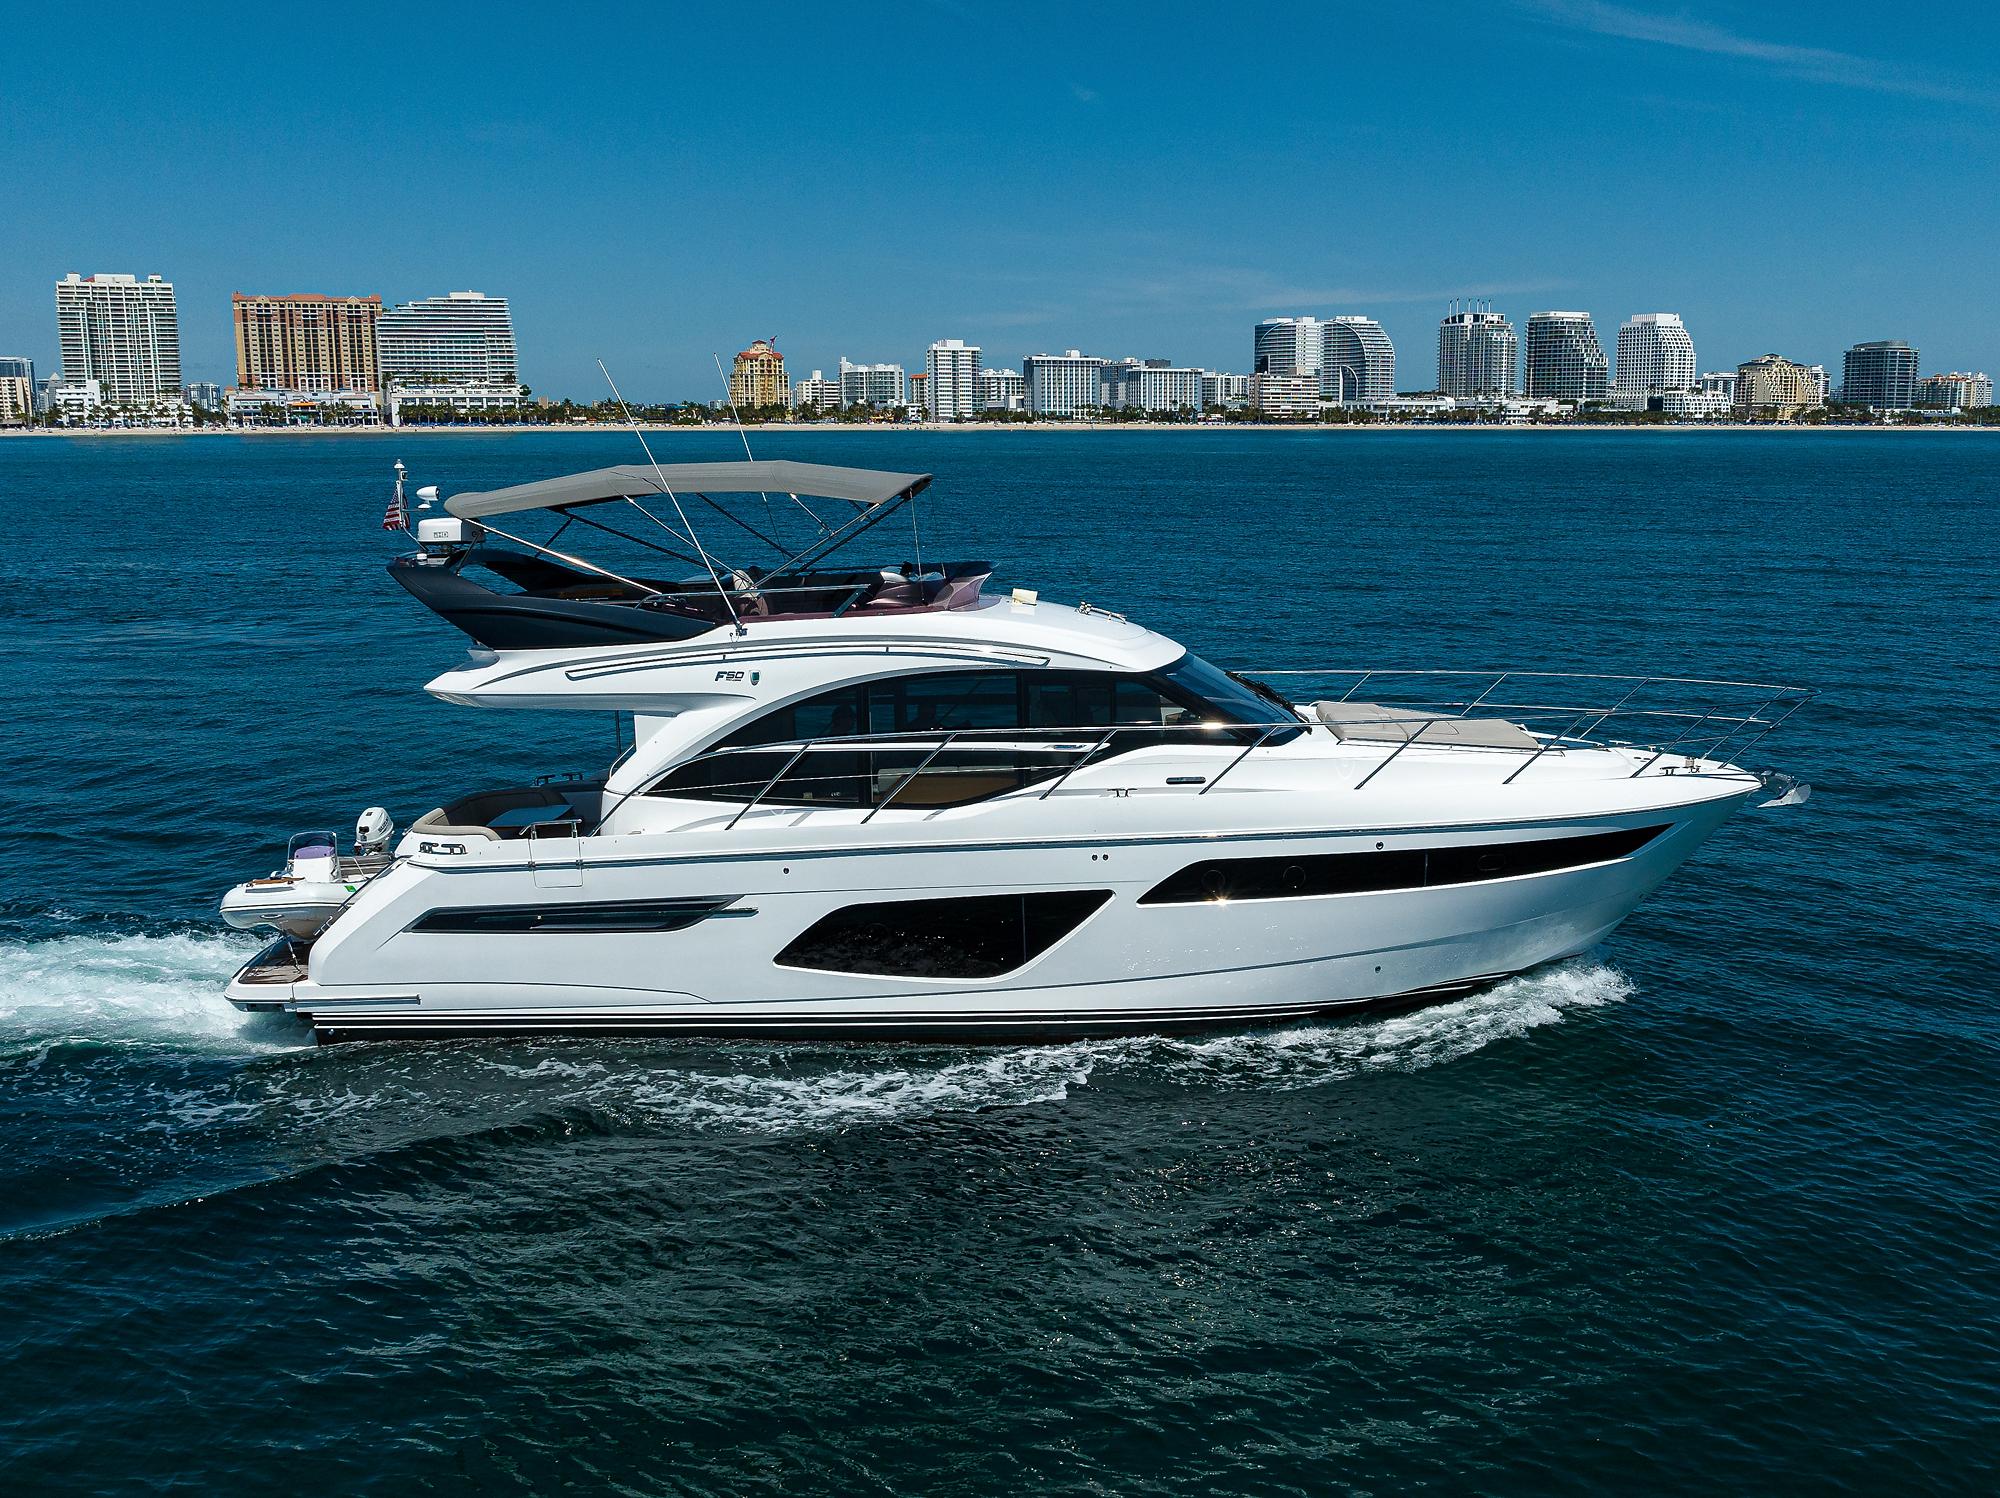 Princess F50 - Applause - Exterior starboard profile photo on water